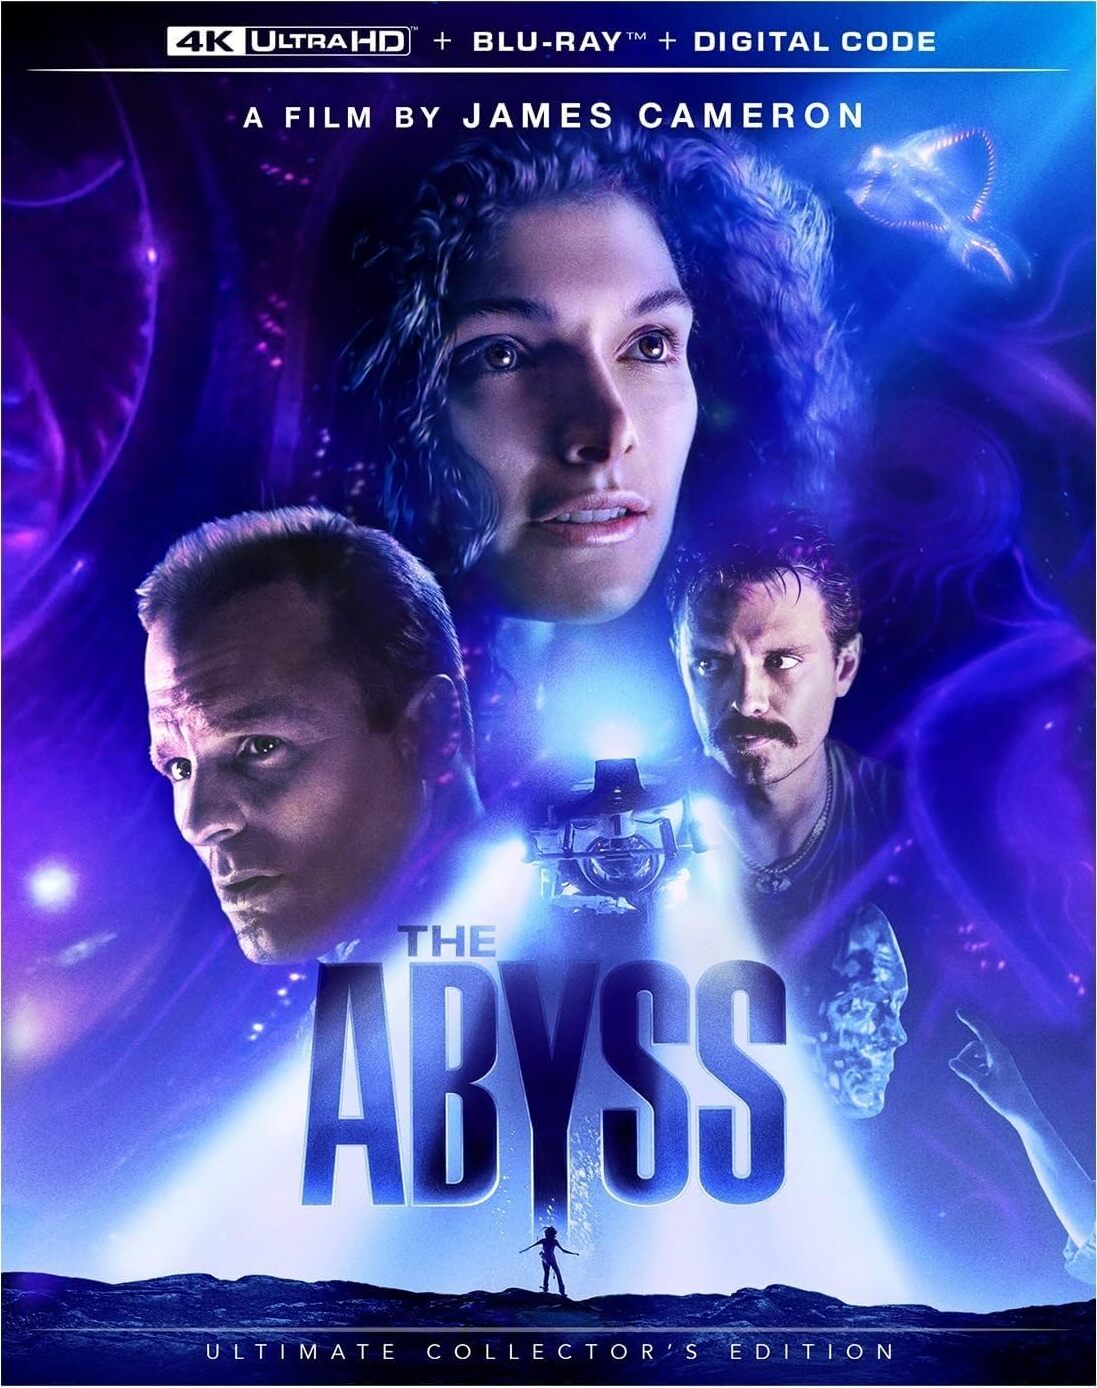 The Abyss 4K Ultra HD + Blu-ray + Digital Ultimate Collectors Edition Includes Slip Cover